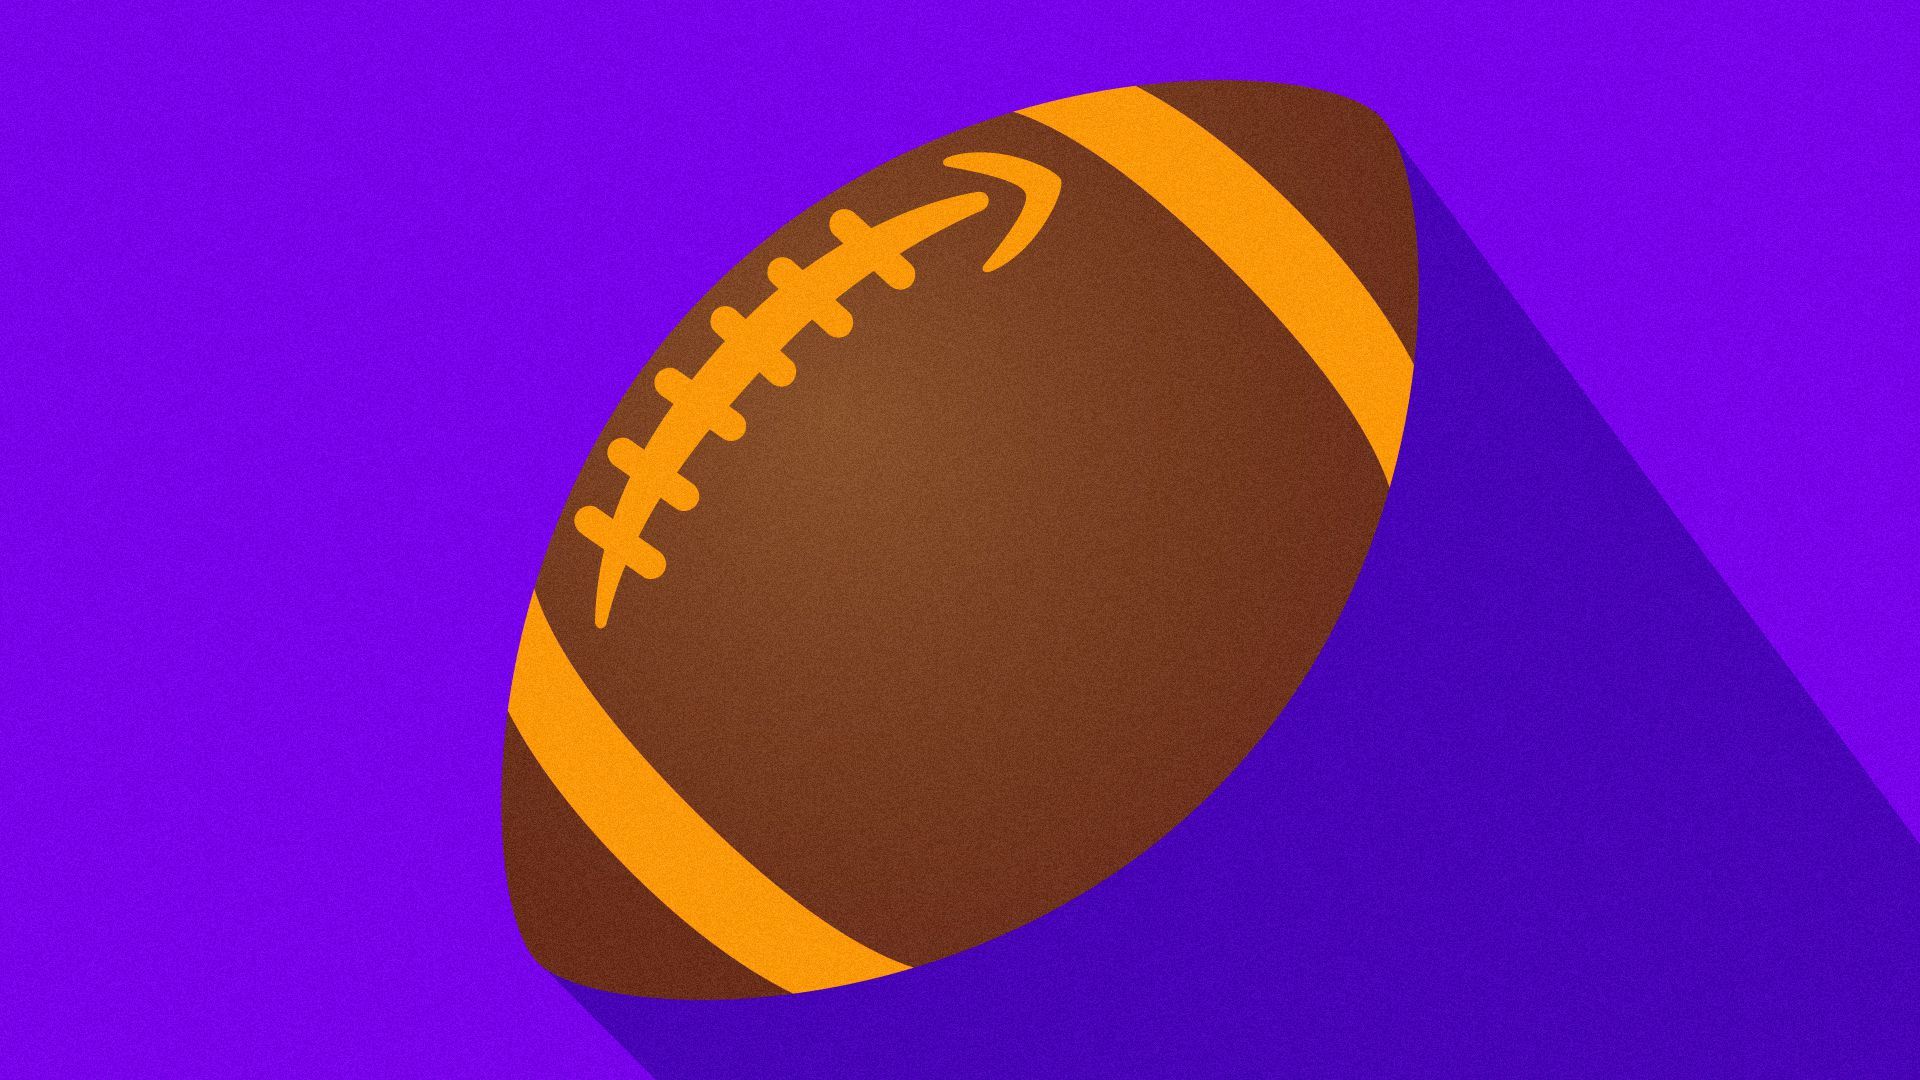 Illustration of a football with Amazon’s logo as stitching.